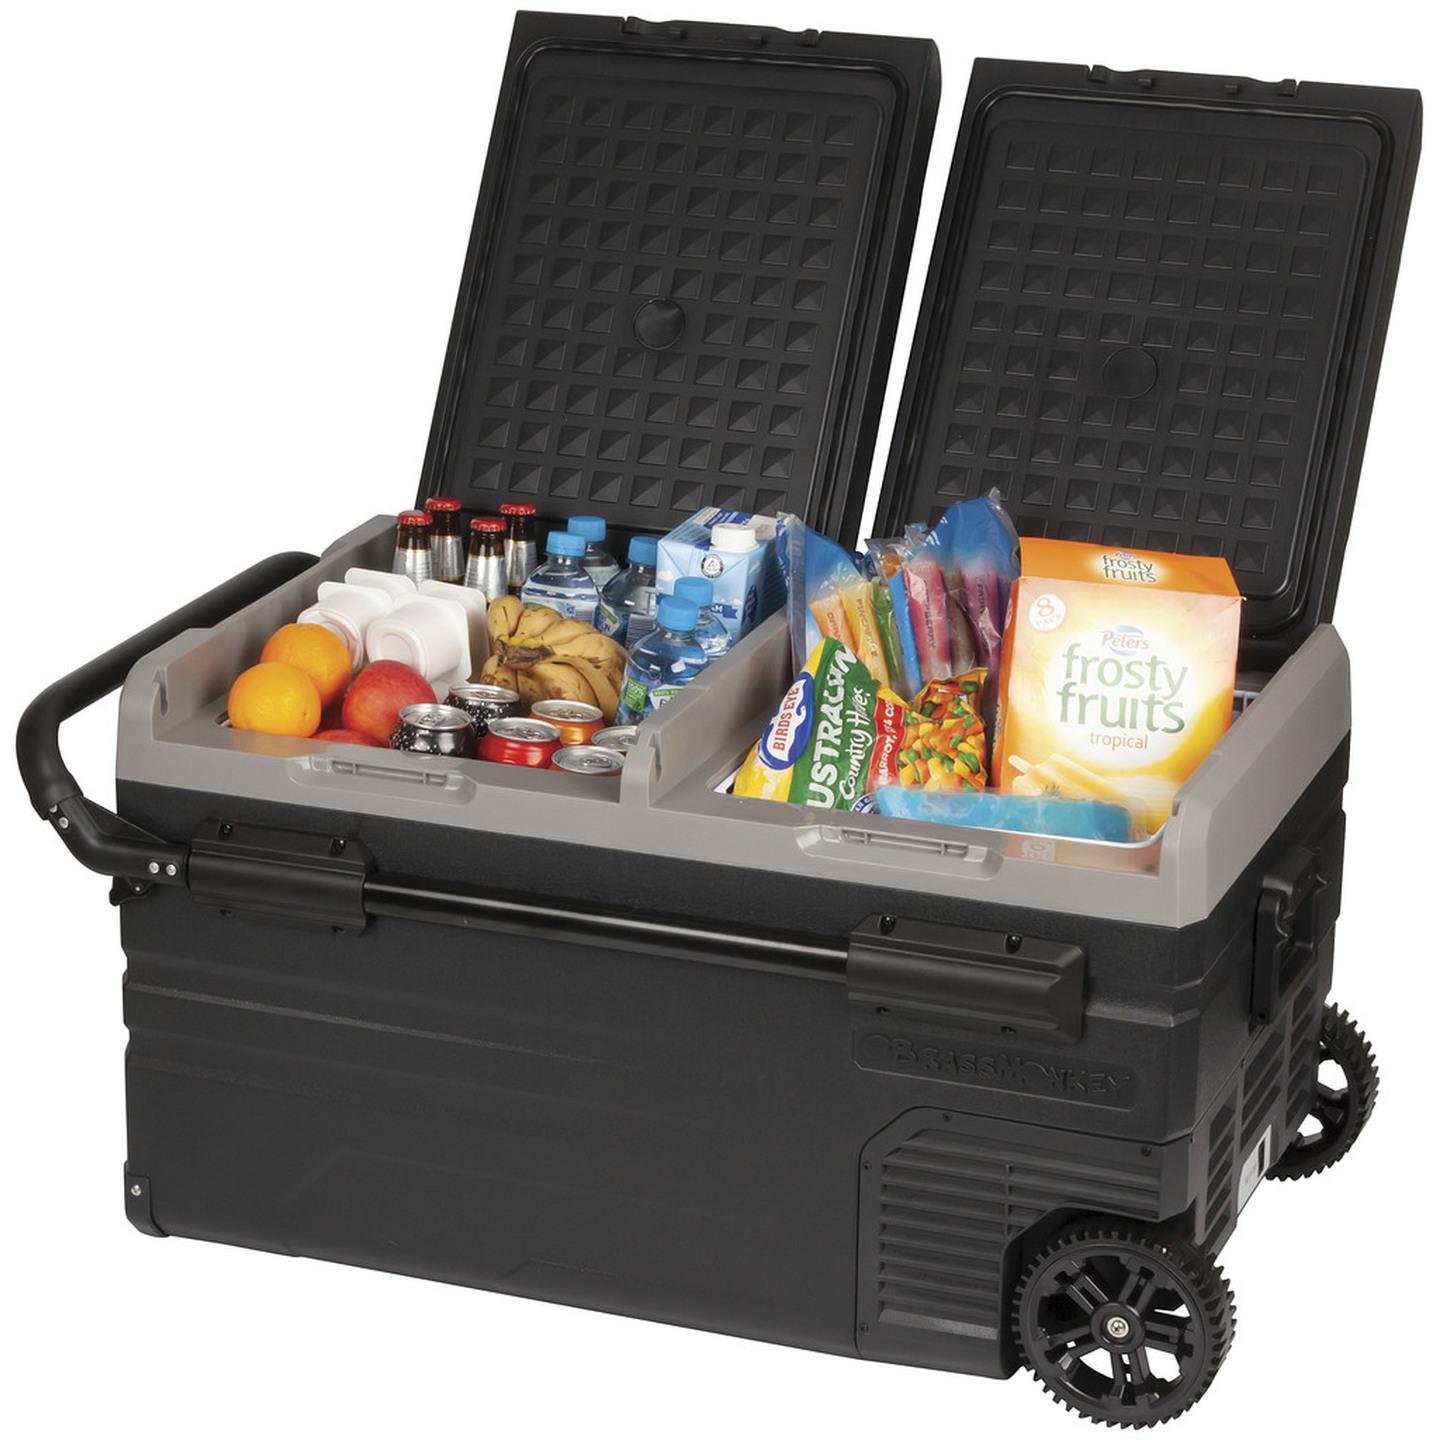 75L  Brass Monkey Portable Dual Zone Fridge and Freezer with Handles and Wheels